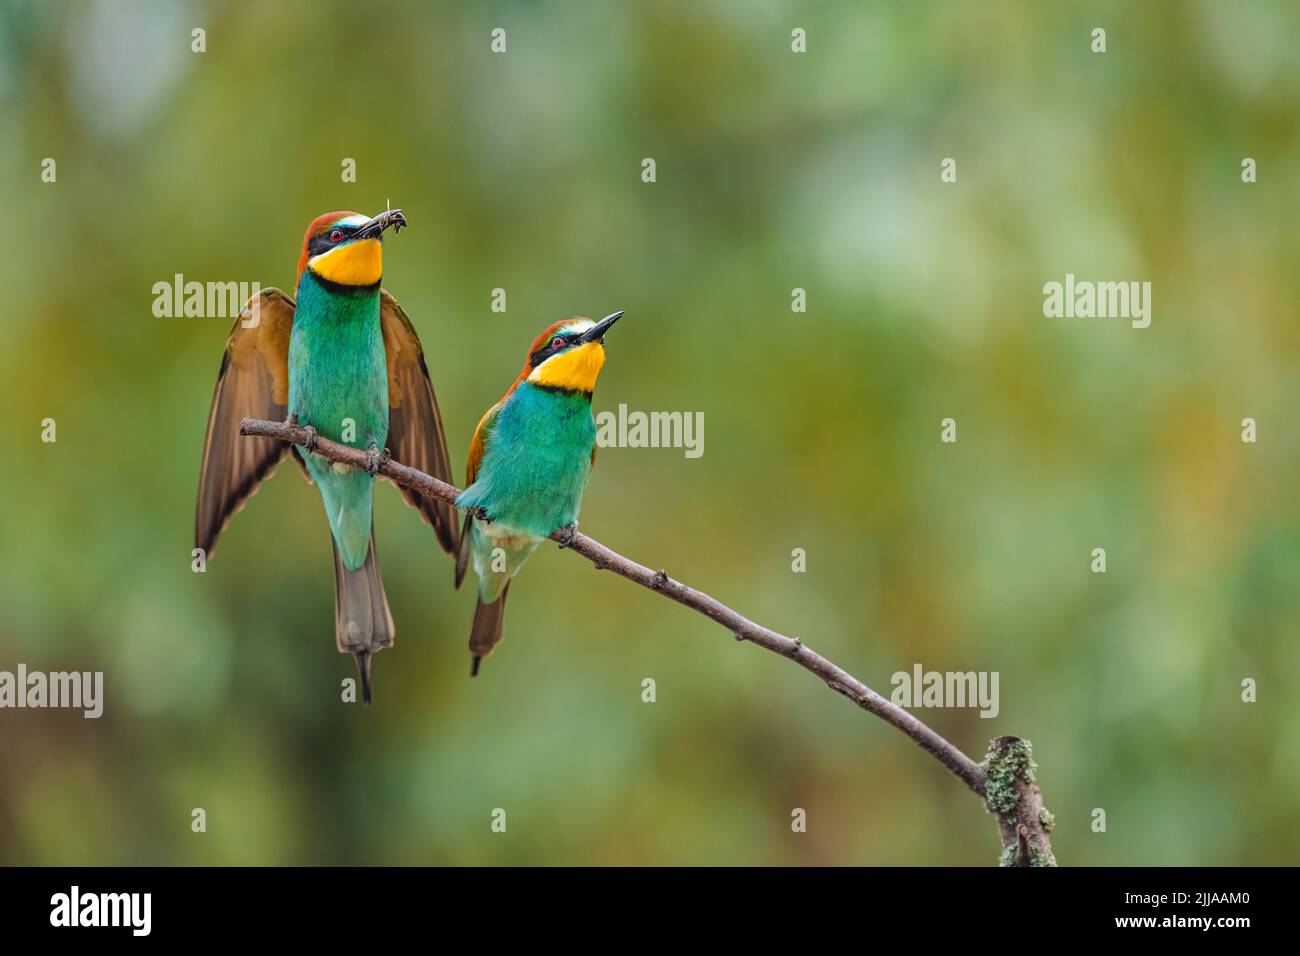 A pair of European bee-eater birds (Merops apiaster) perching on a branch. The male has a bee in his beak and spread wings. Stock Photo